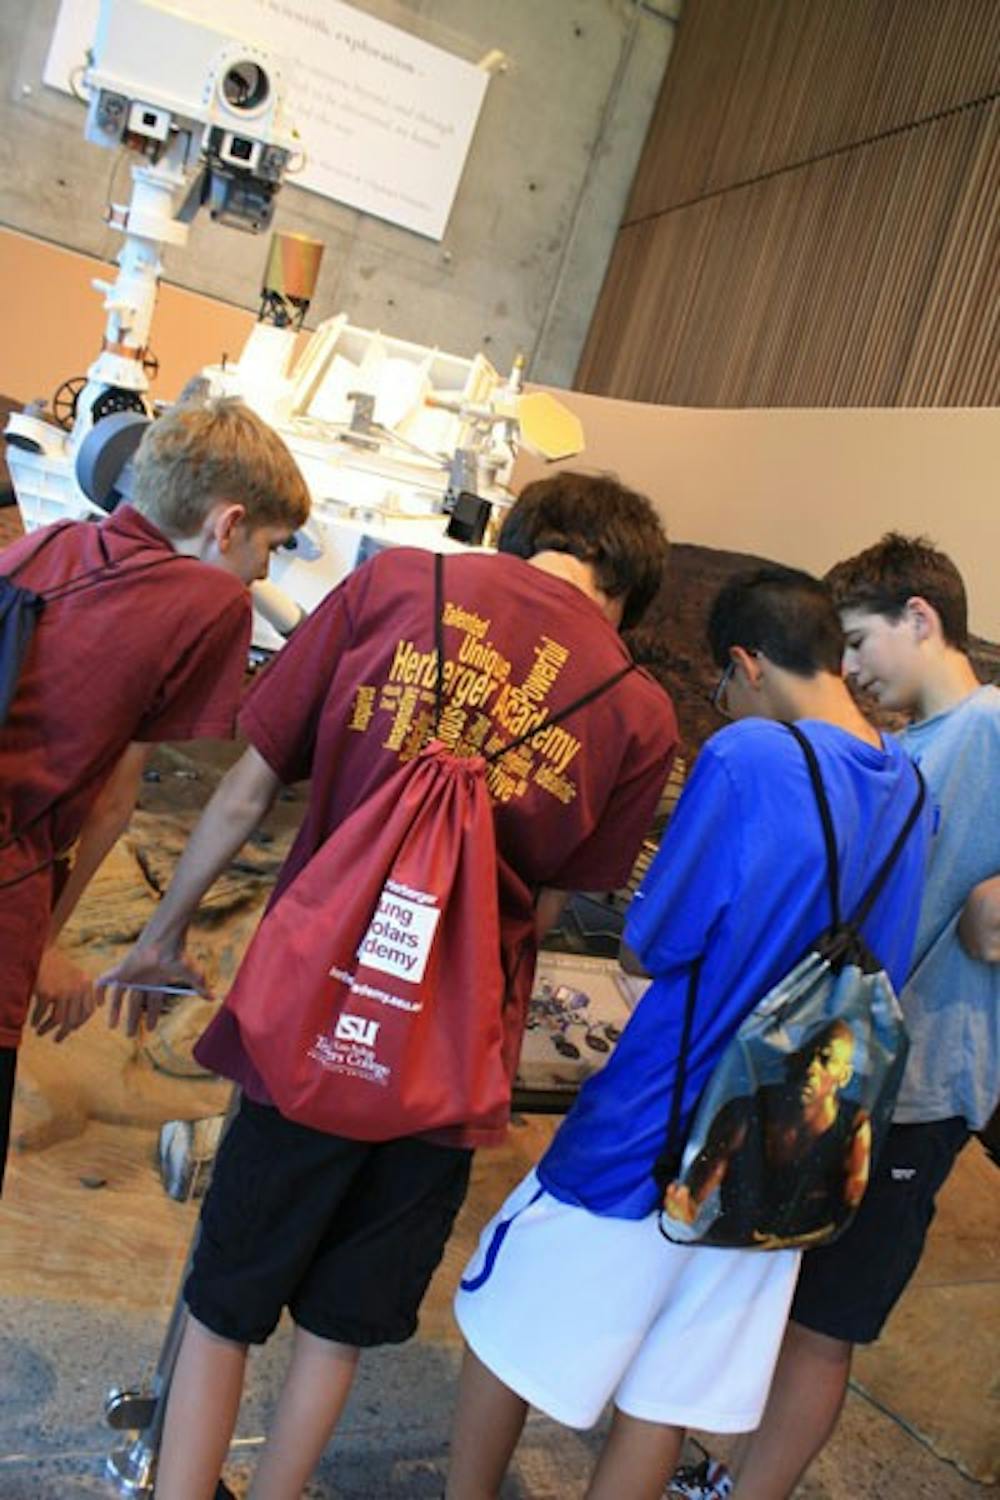 Young students from the West Campus's Herberger Institute visited the ISTB 4 building on its grand opening, beginning the tour by stopping at the life-size replica of the Mars Rover Curiosity. (Photo by Jessie Wardarski)